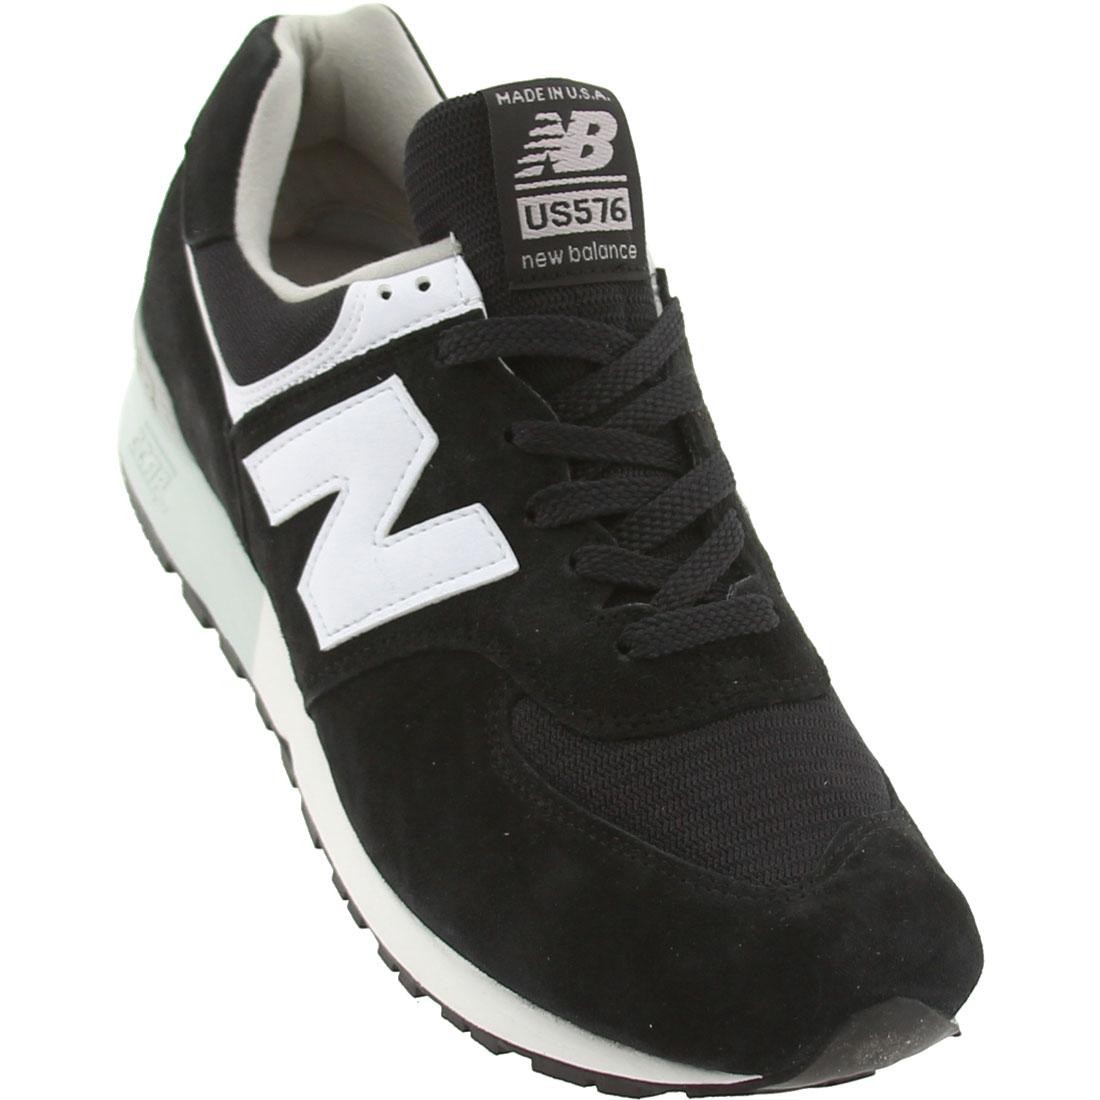 New Balance Men US576ND1 - Made In USA